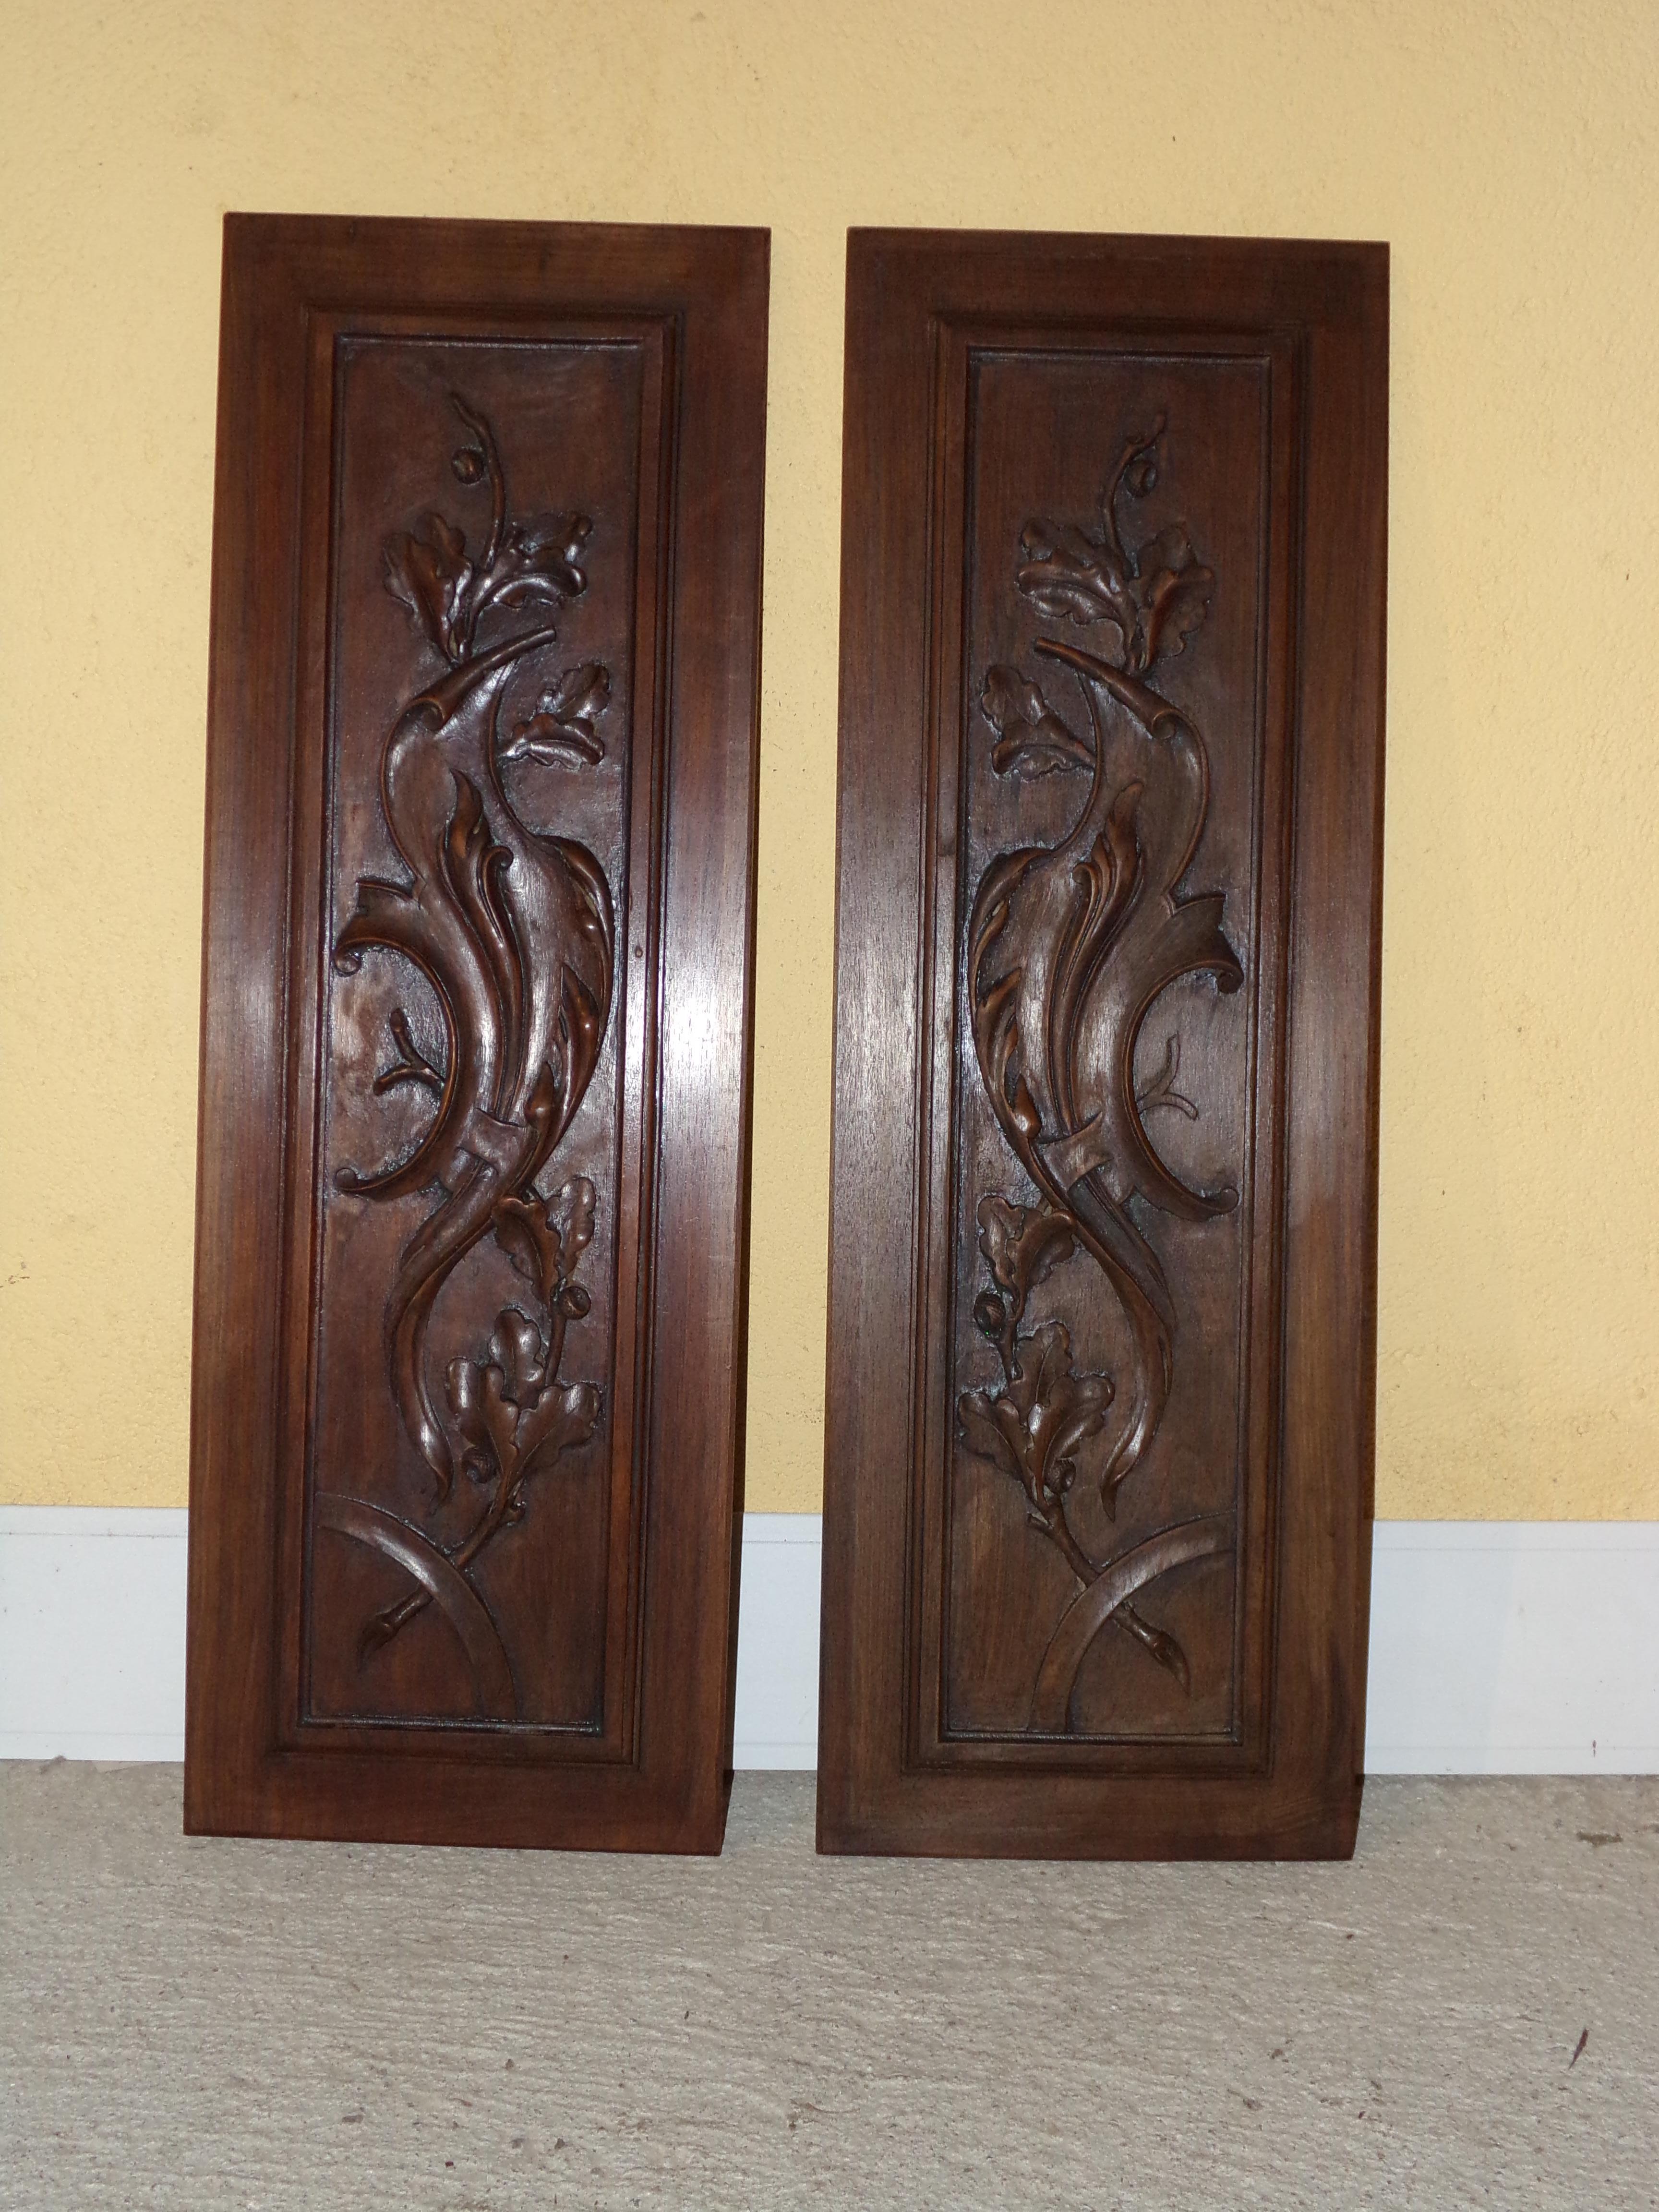 A fine pair of Renaissance Revival panels in solid hand carved walnut, circa 1880
Size
 Height 25.5 inches 
Width 8.5 inches
 Thickness 1/2 an inch.